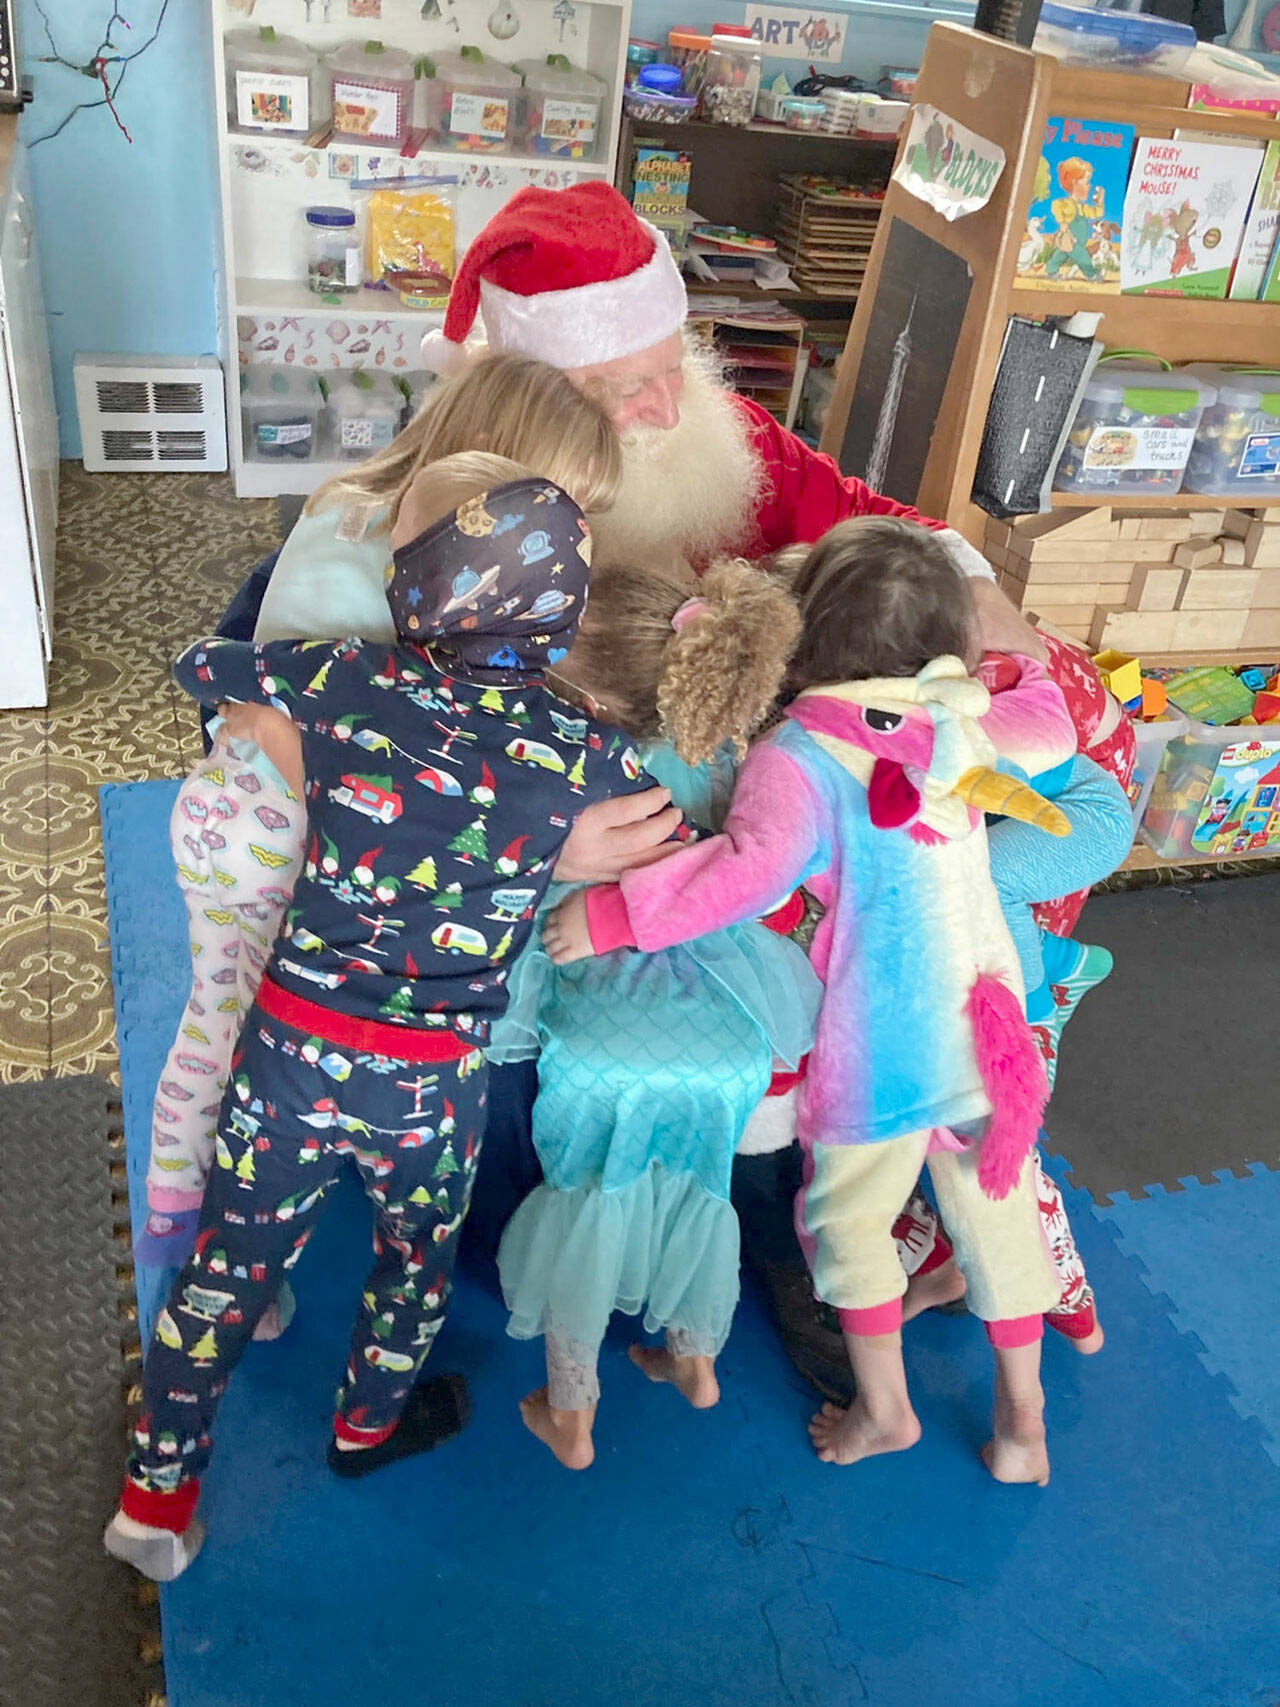 Children at Diane’s Daycare swarm around Barry Swegle during a visit from Santa. (Photo courtesy Diane’s Daycare)